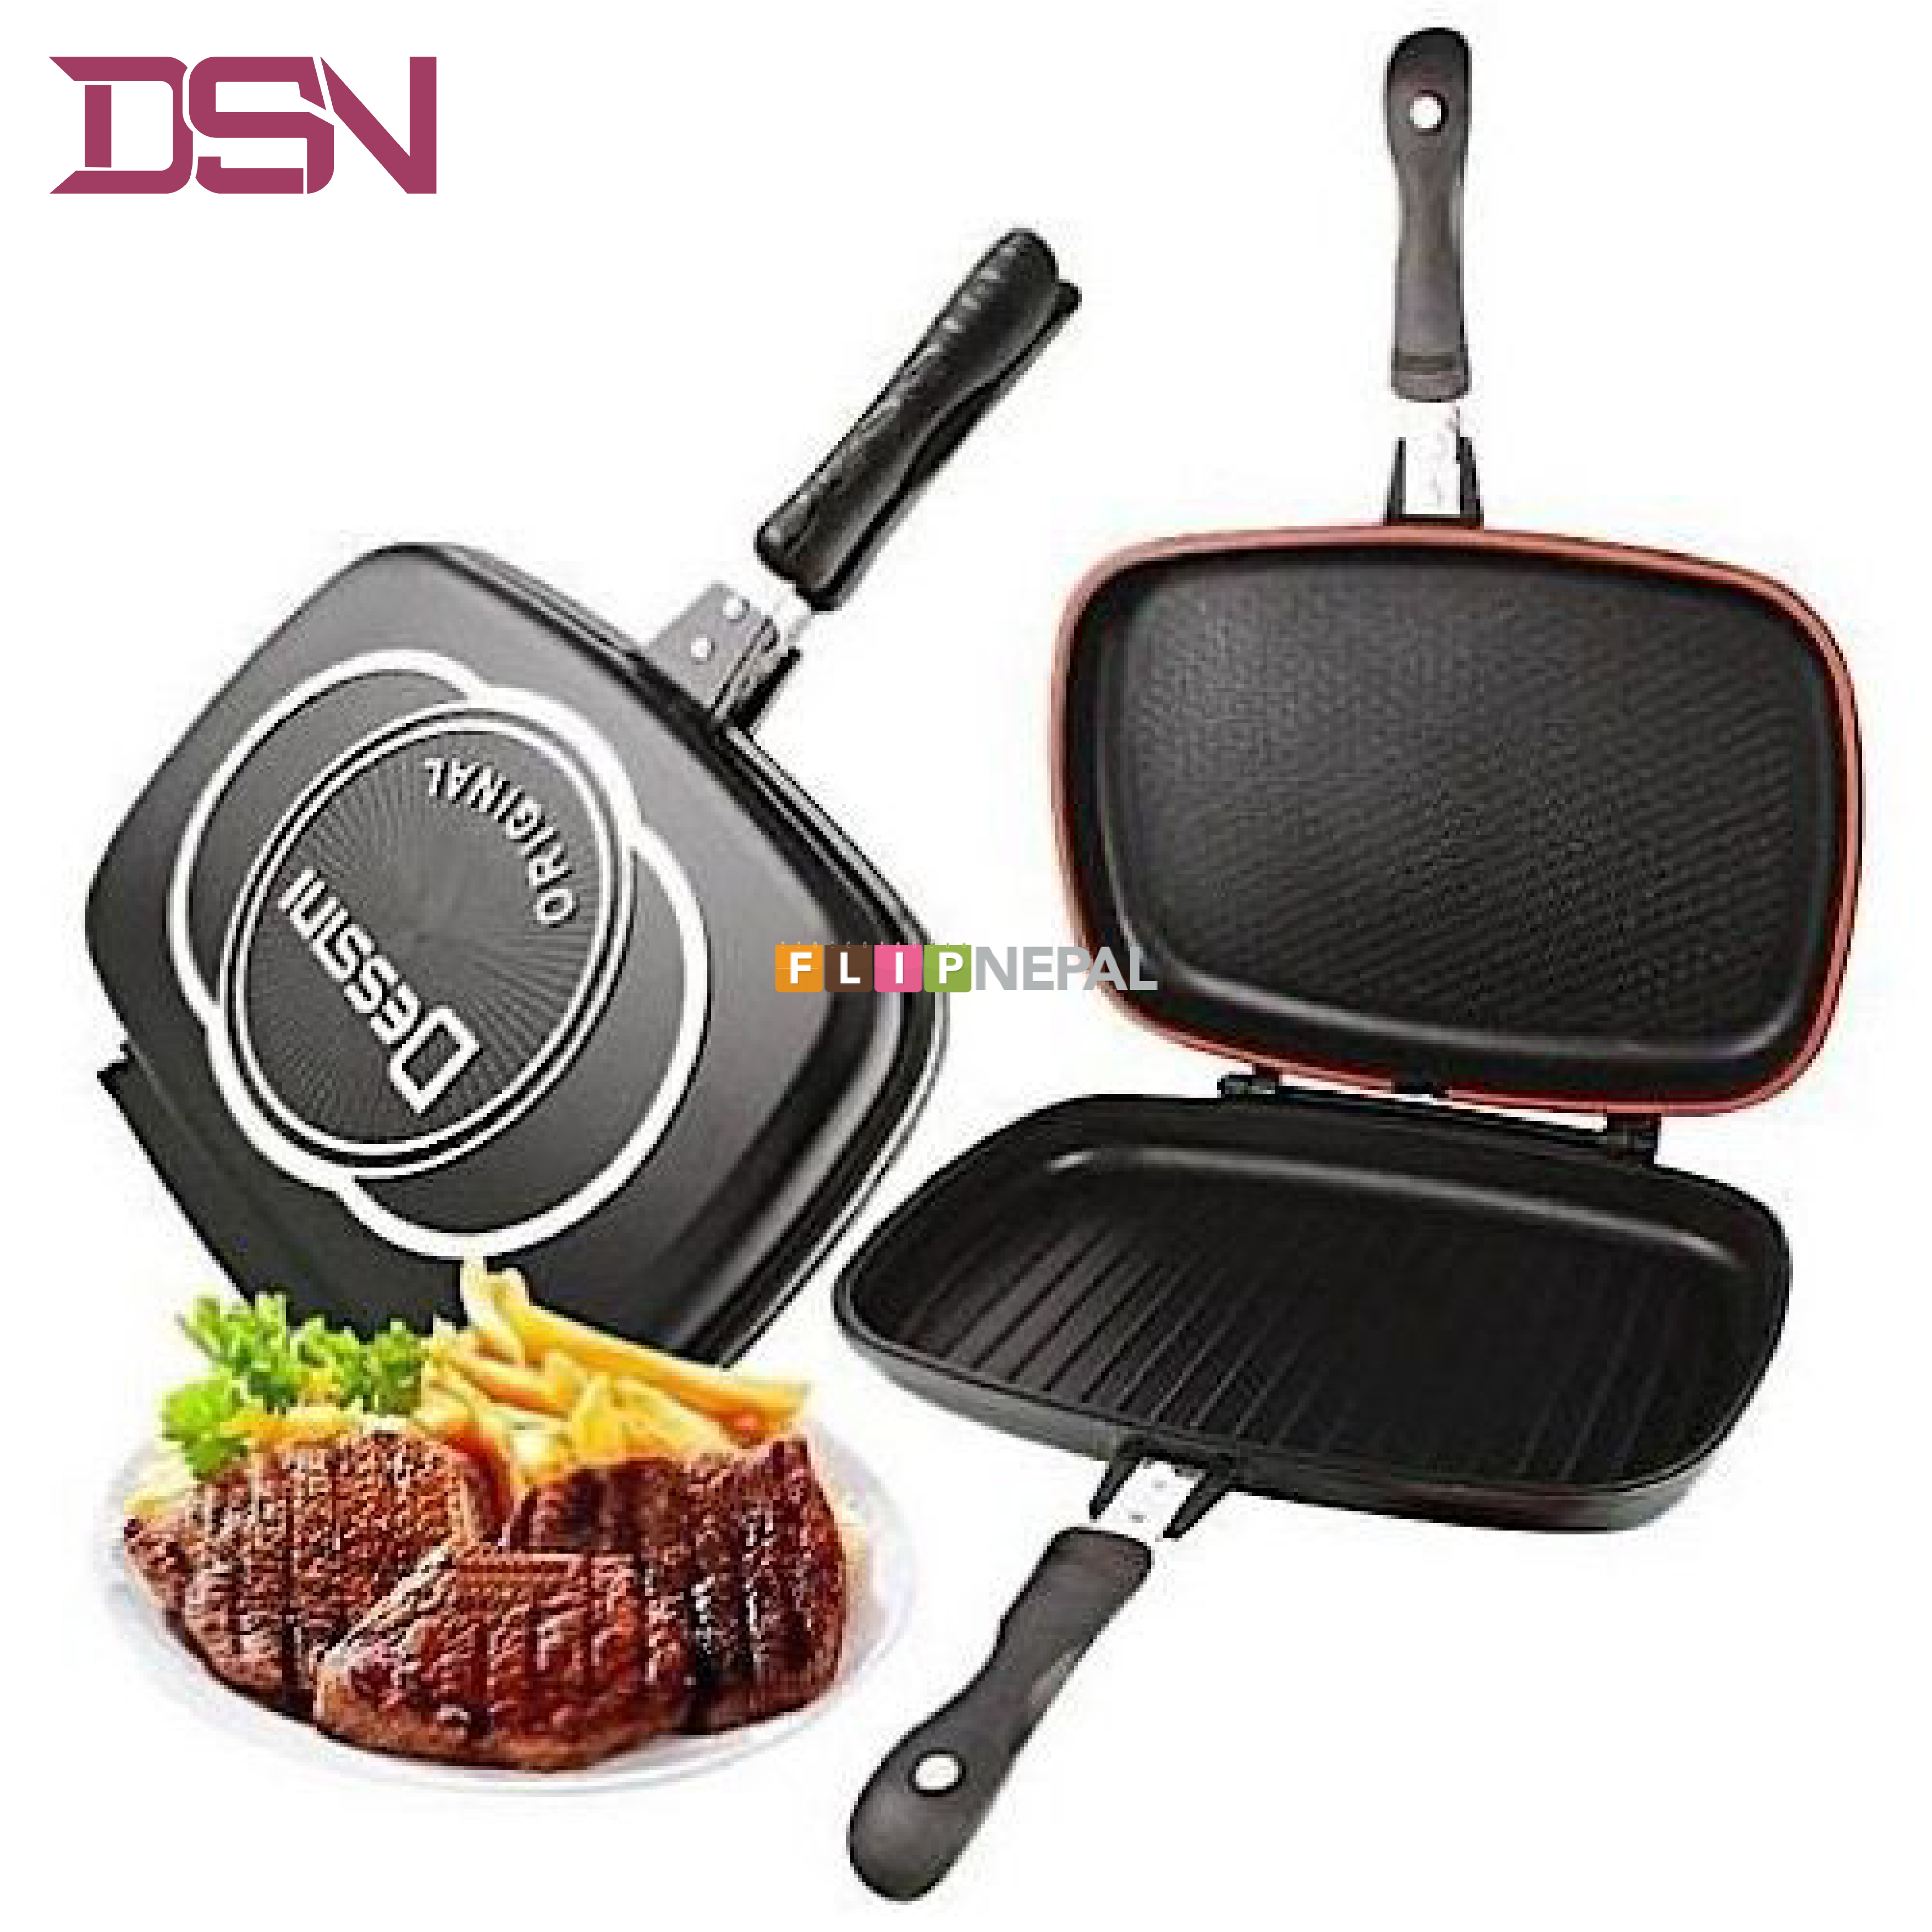 Double Sided Grill Nonstick Pan